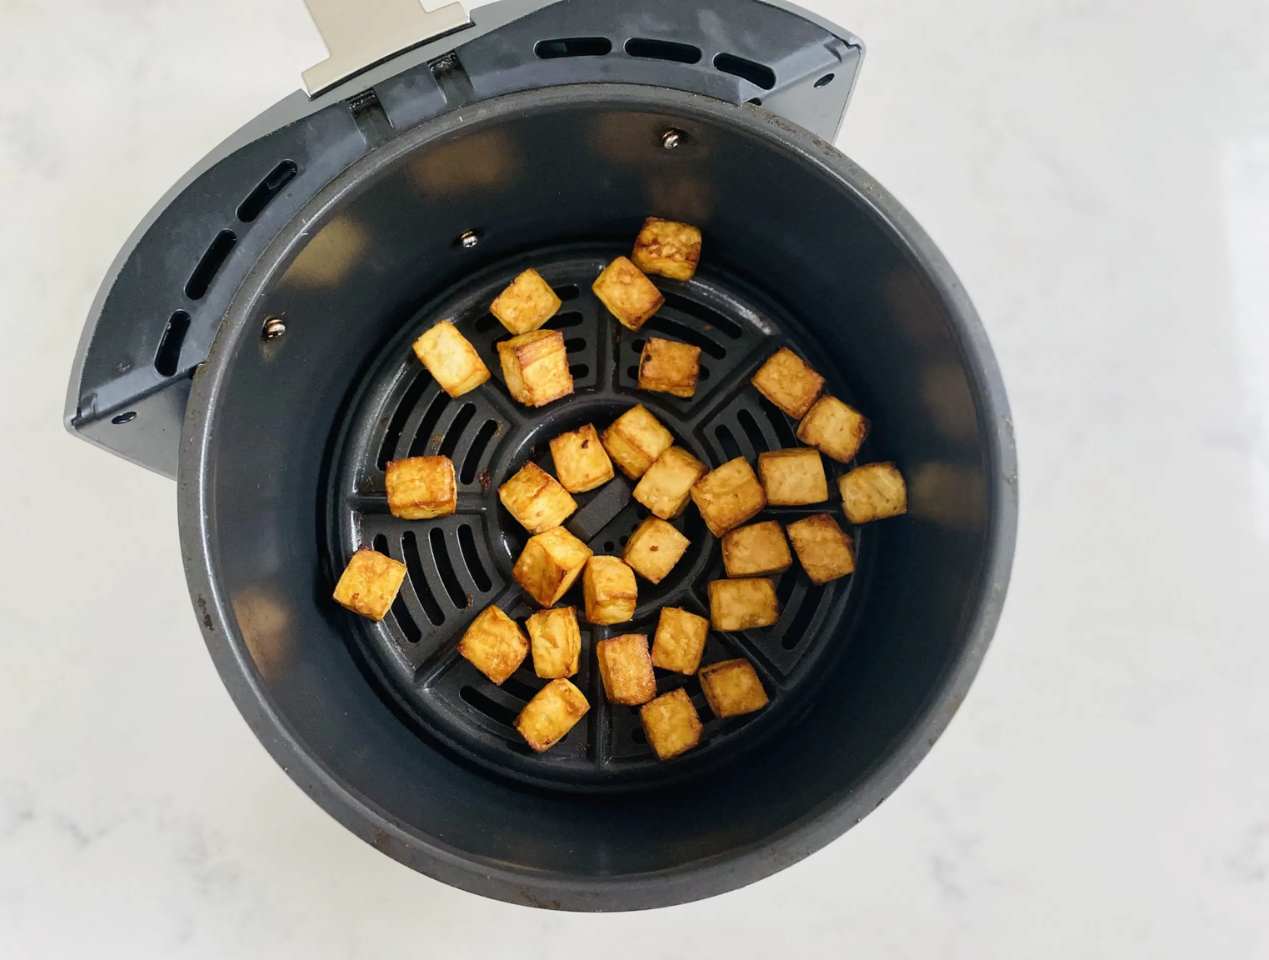 Cooked tofu inside the tray of one of the best air fryers on top of a marble kitchen work top